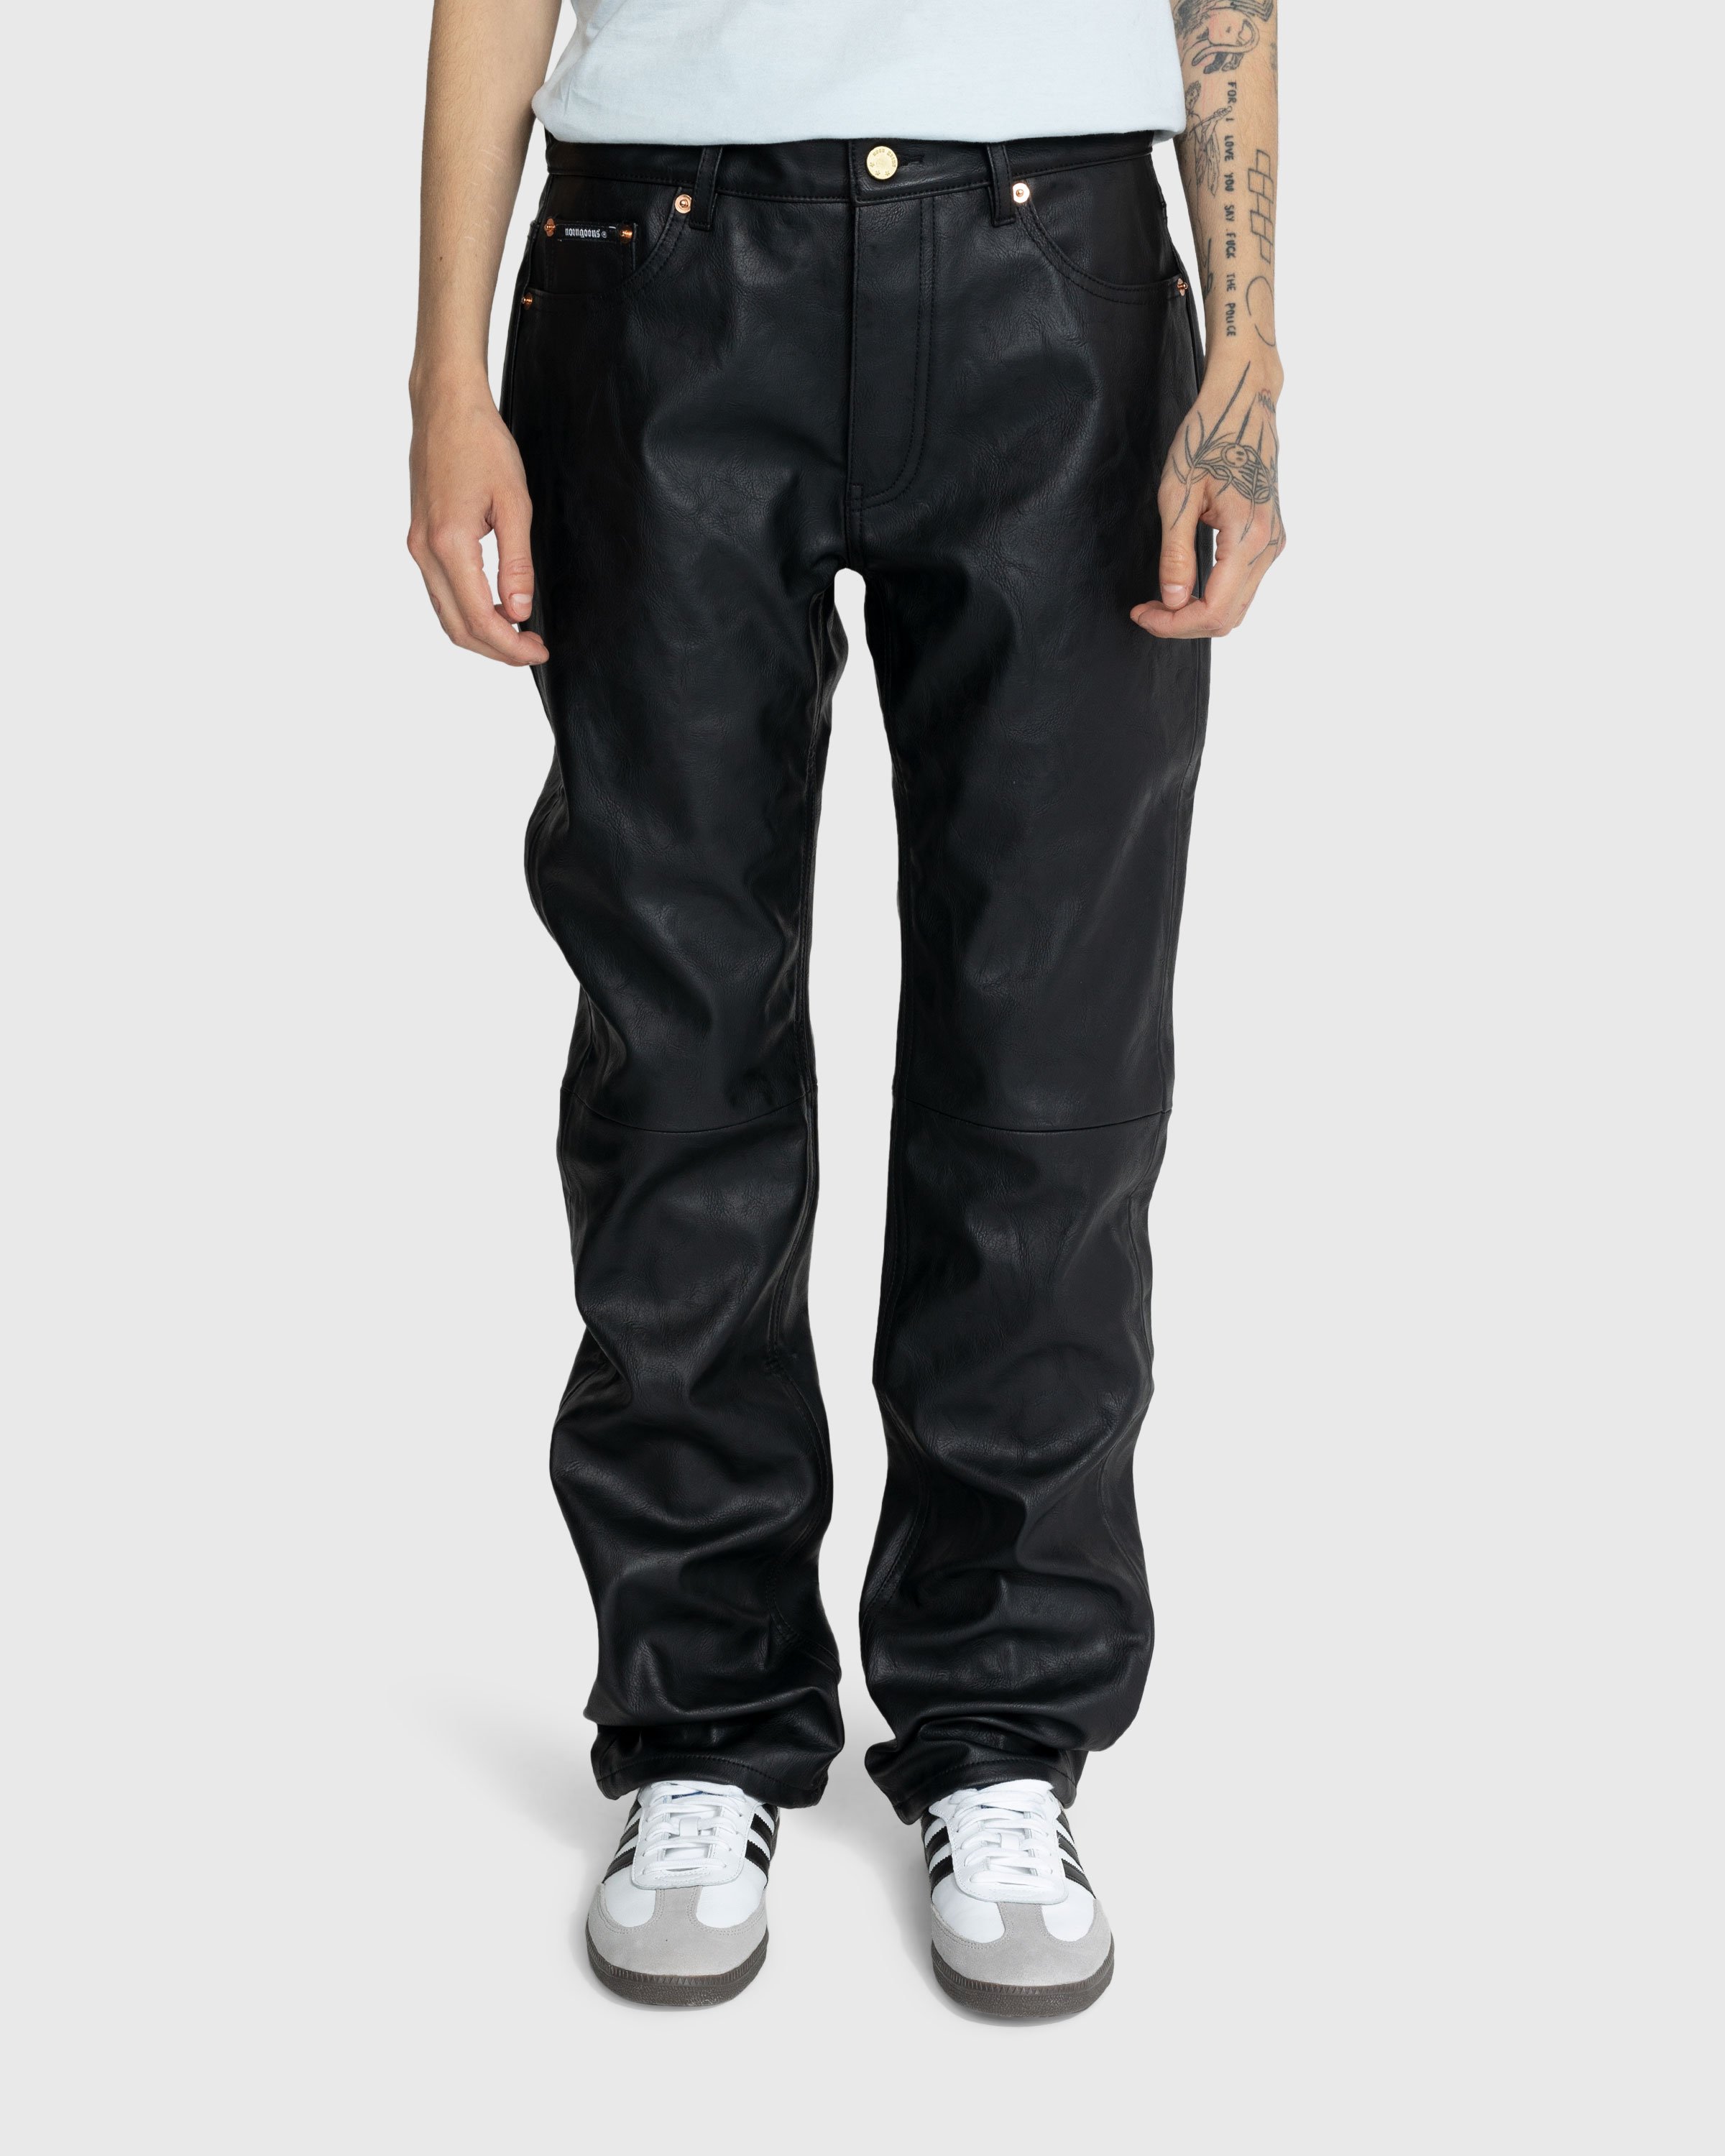 Noon Goons - GP Faux Leather Pant Black - Clothing - Black - Image 2